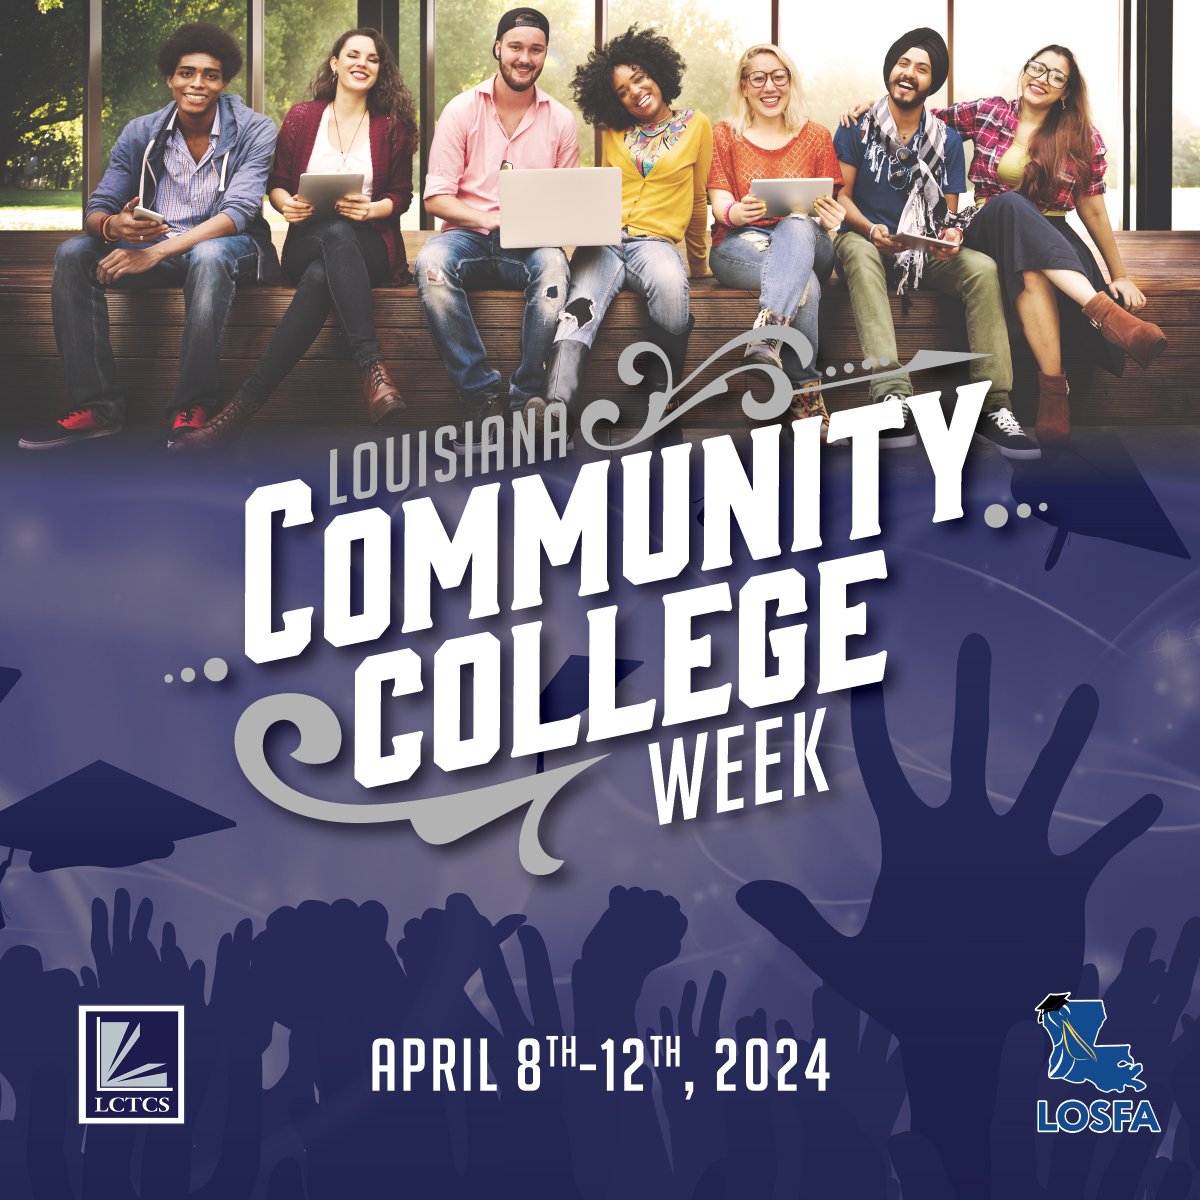 Join LCTCS and @LOSFA as we celebrate #CommunityCollegeWeek 💙✨ Next week, we will host a variety of events geared to showcase program pathways, campus life, financial aid, scholarship opportunities, and more. View the full schedule here: ow.ly/cuYX50R9rvw